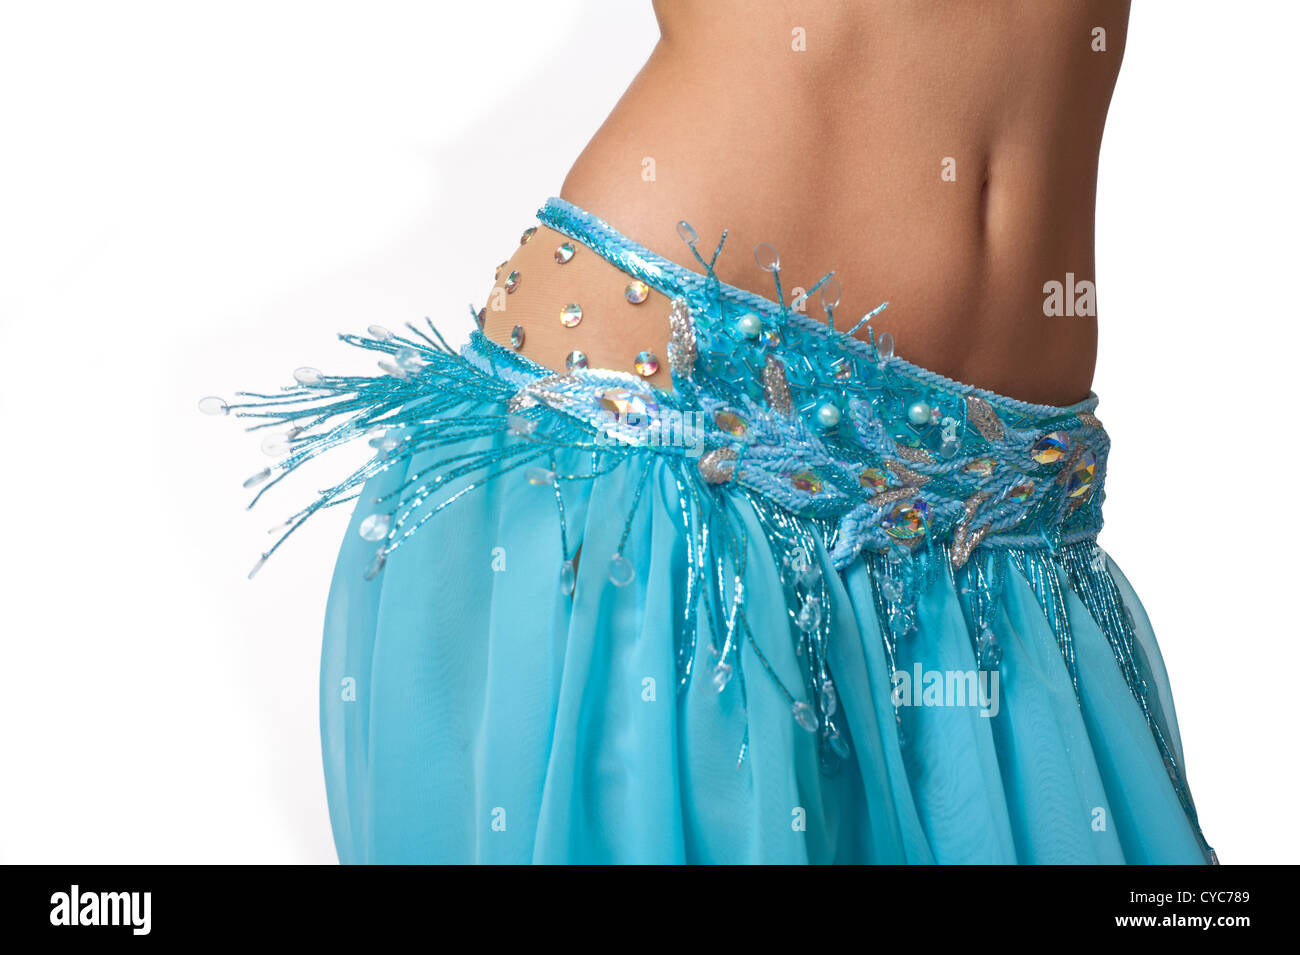 Close up shot of a belly dancer wearing a light blue costume shaking her hips. Isolated on white. Stock Photo